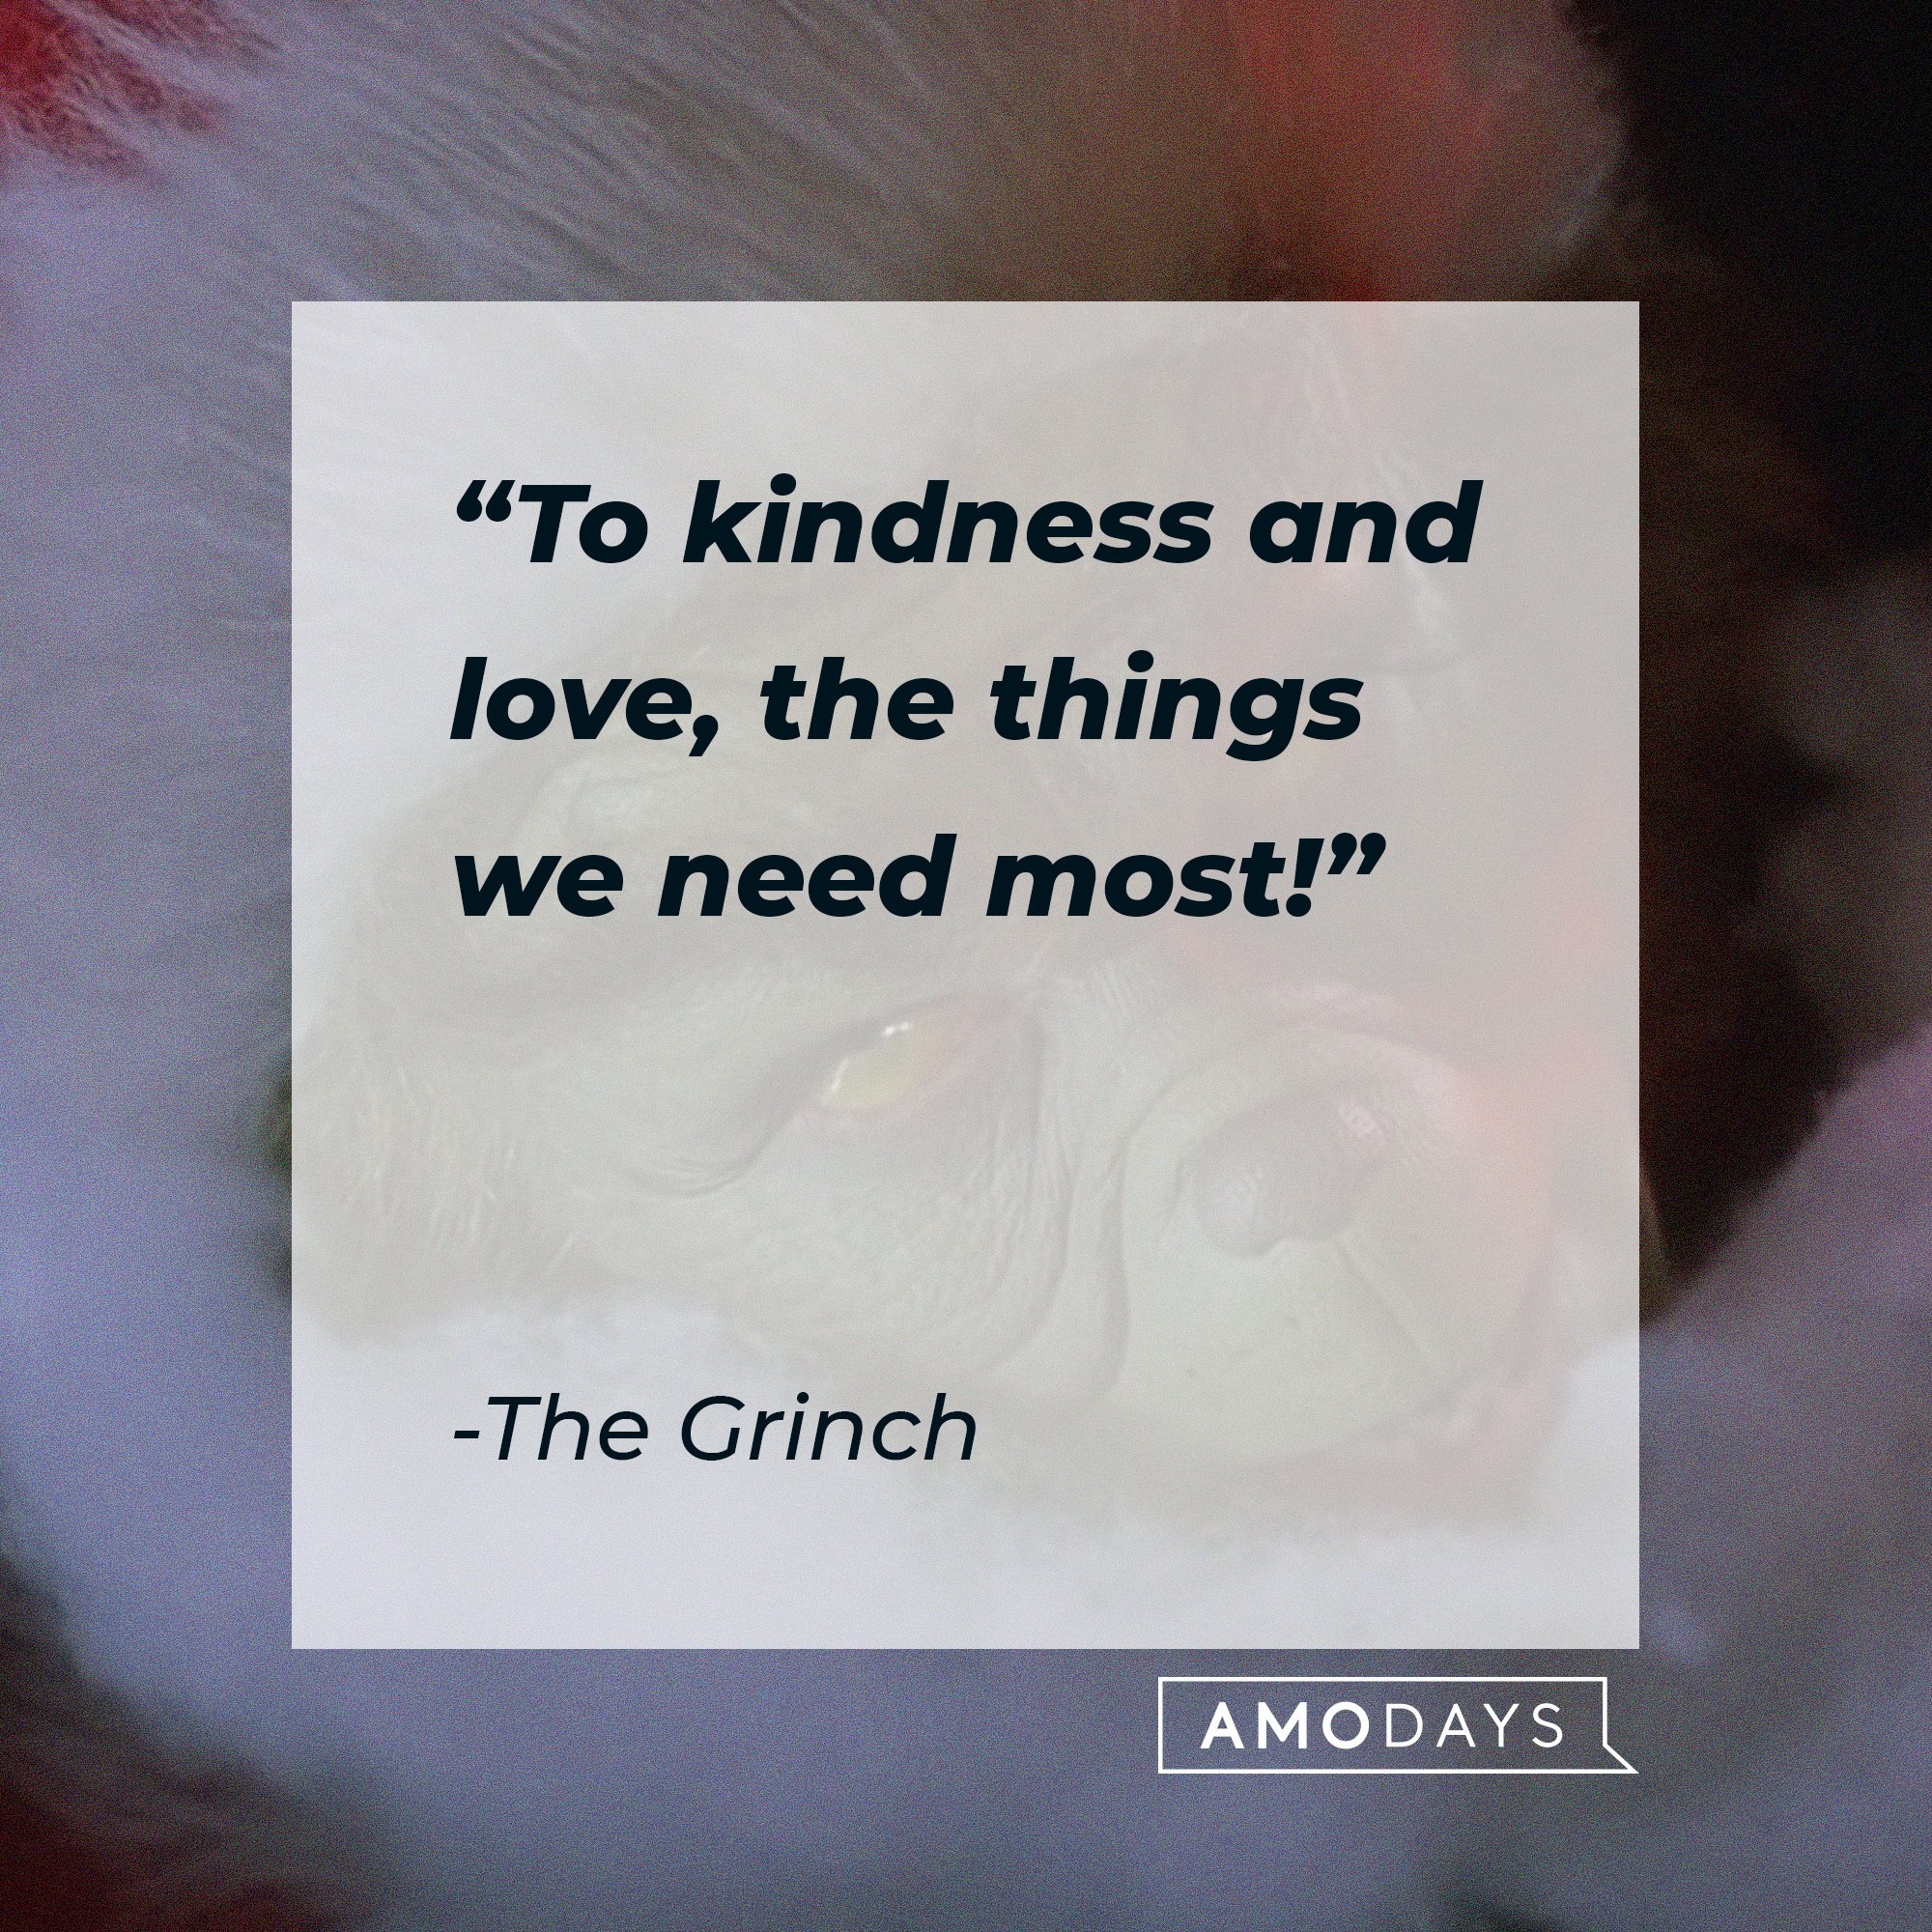 The Grinch's quote: "To kindness and love, the things we need most!" | Image: AmoDays